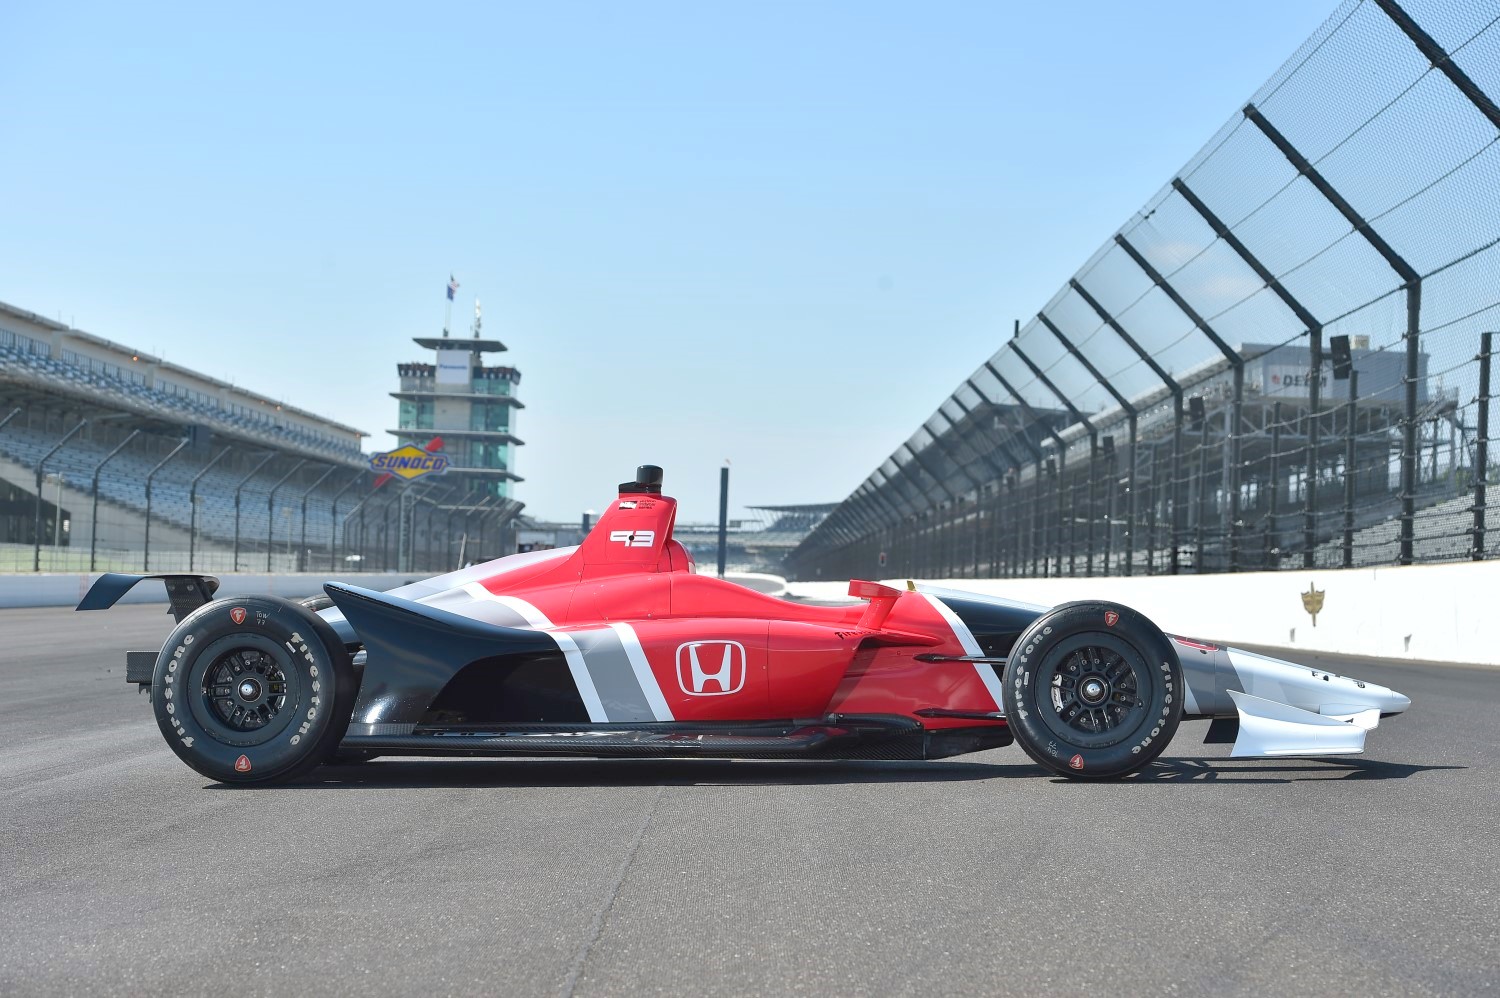 Old IndyCar with new body pieces called new car